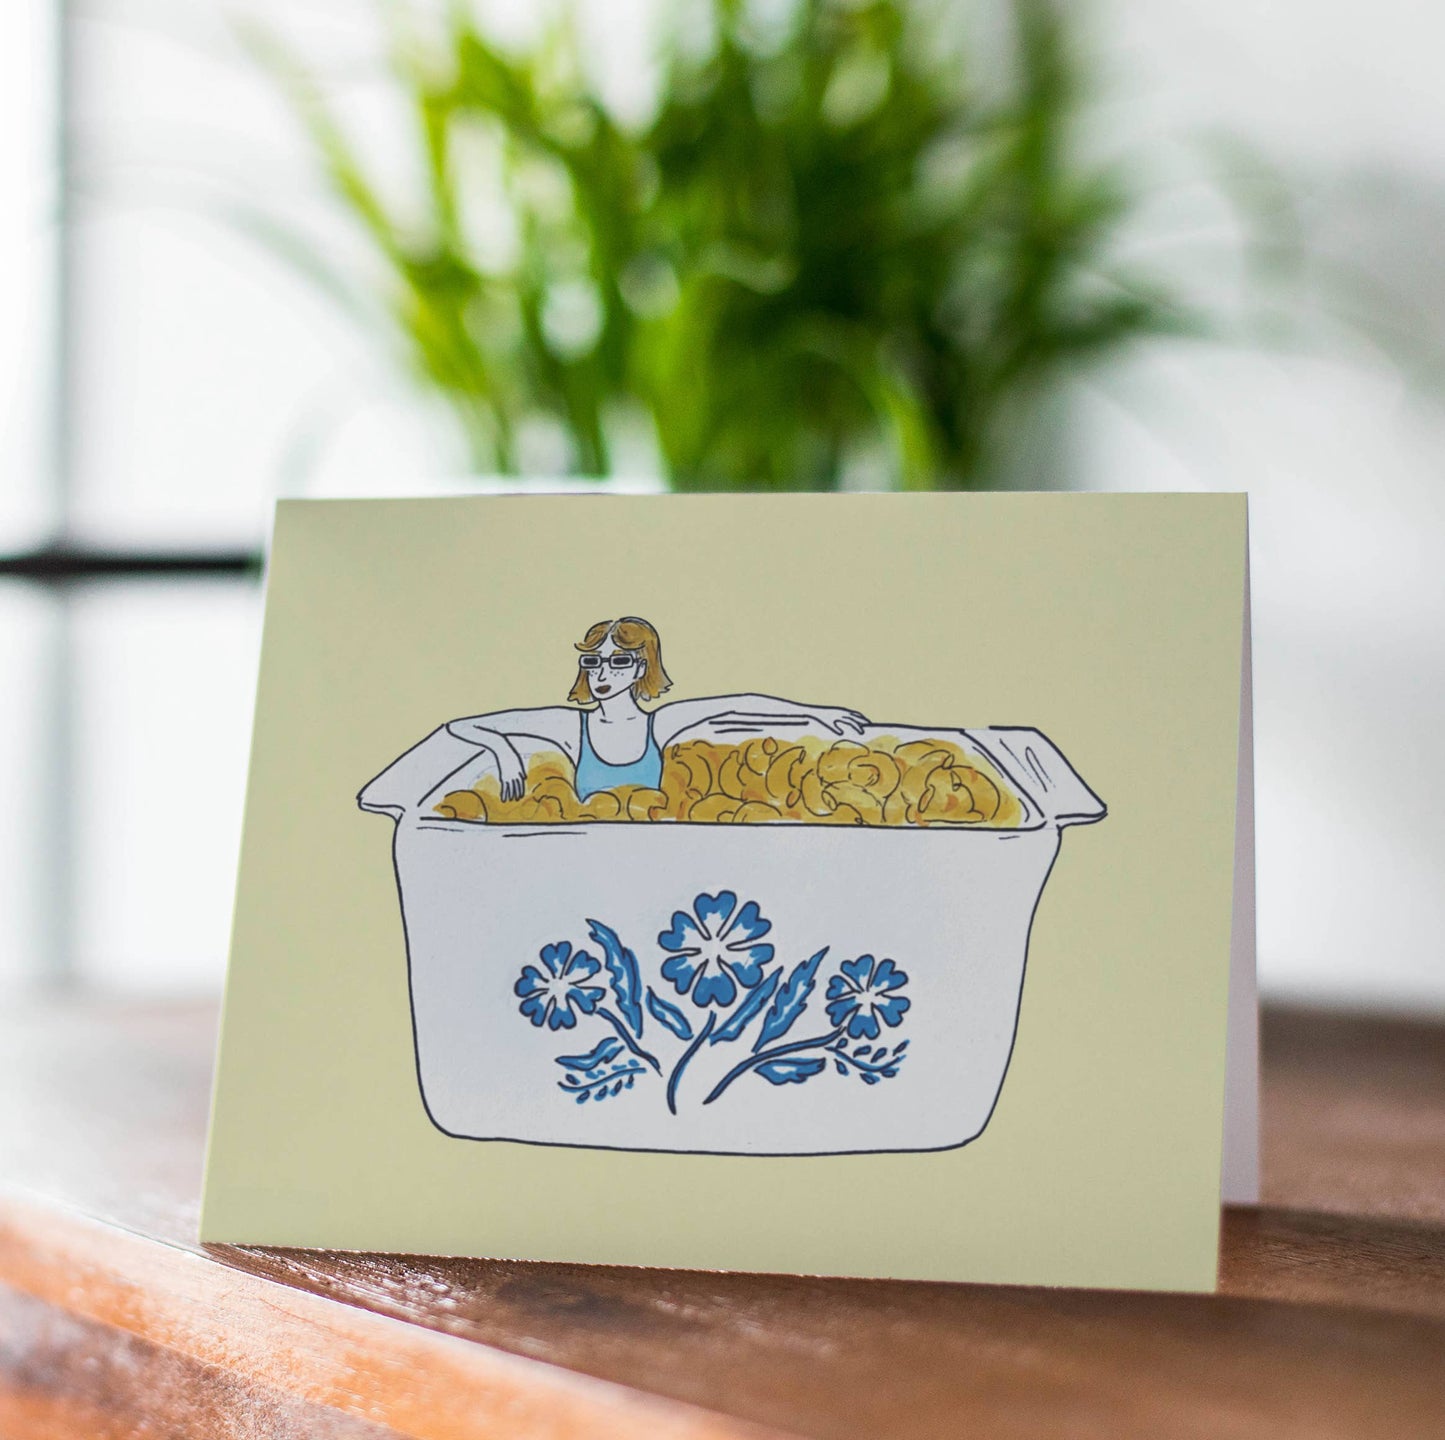 Greeting card with woman sitting in a mac and cheese filled vintage corningware dish